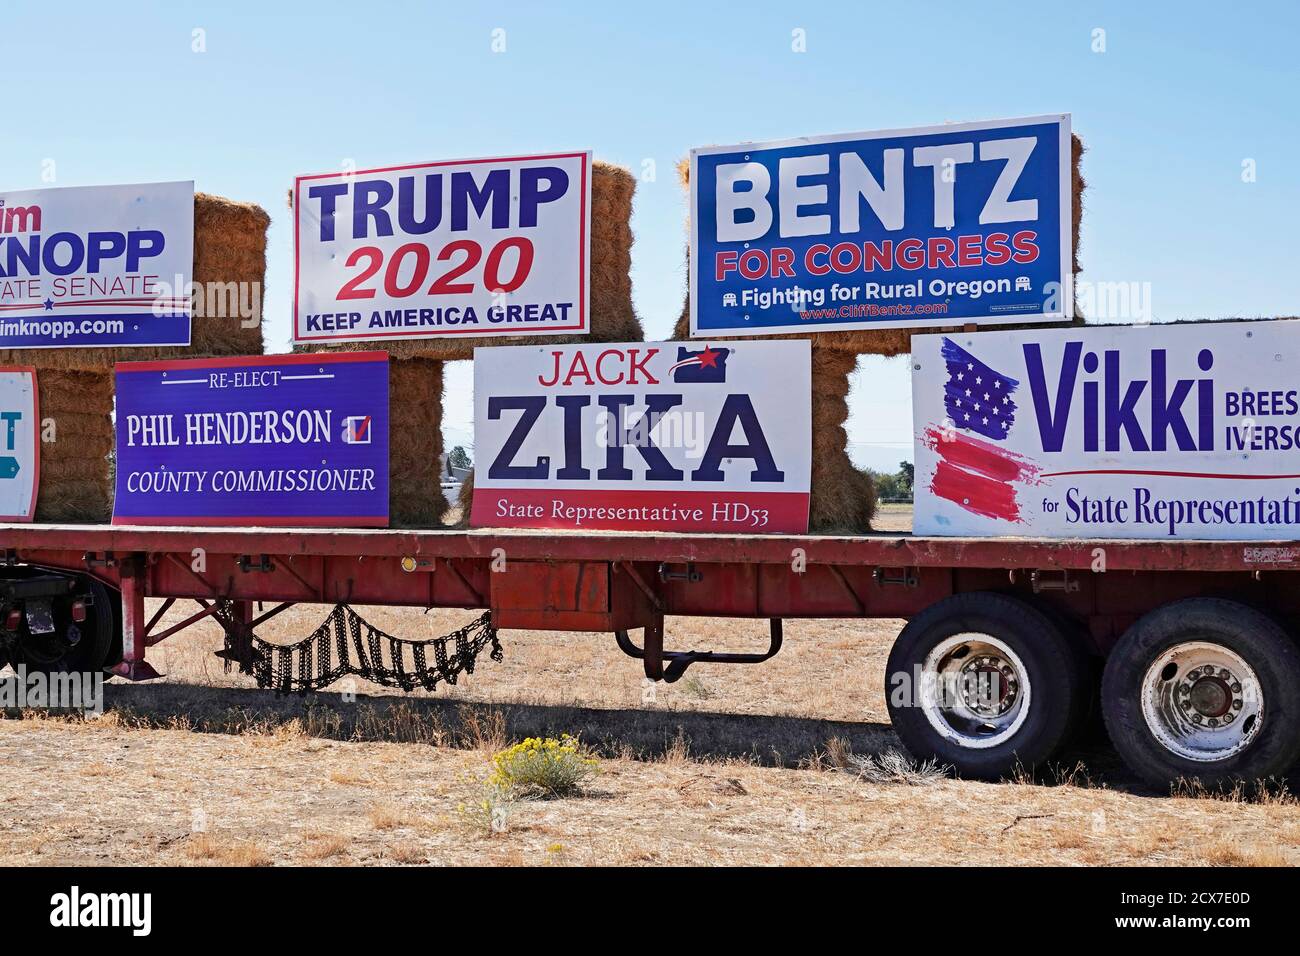 Republican campaign signs, including one for Donald Trump, on display in a field in central Oregon near the town of Redmond, Oregon. 2020. Stock Photo